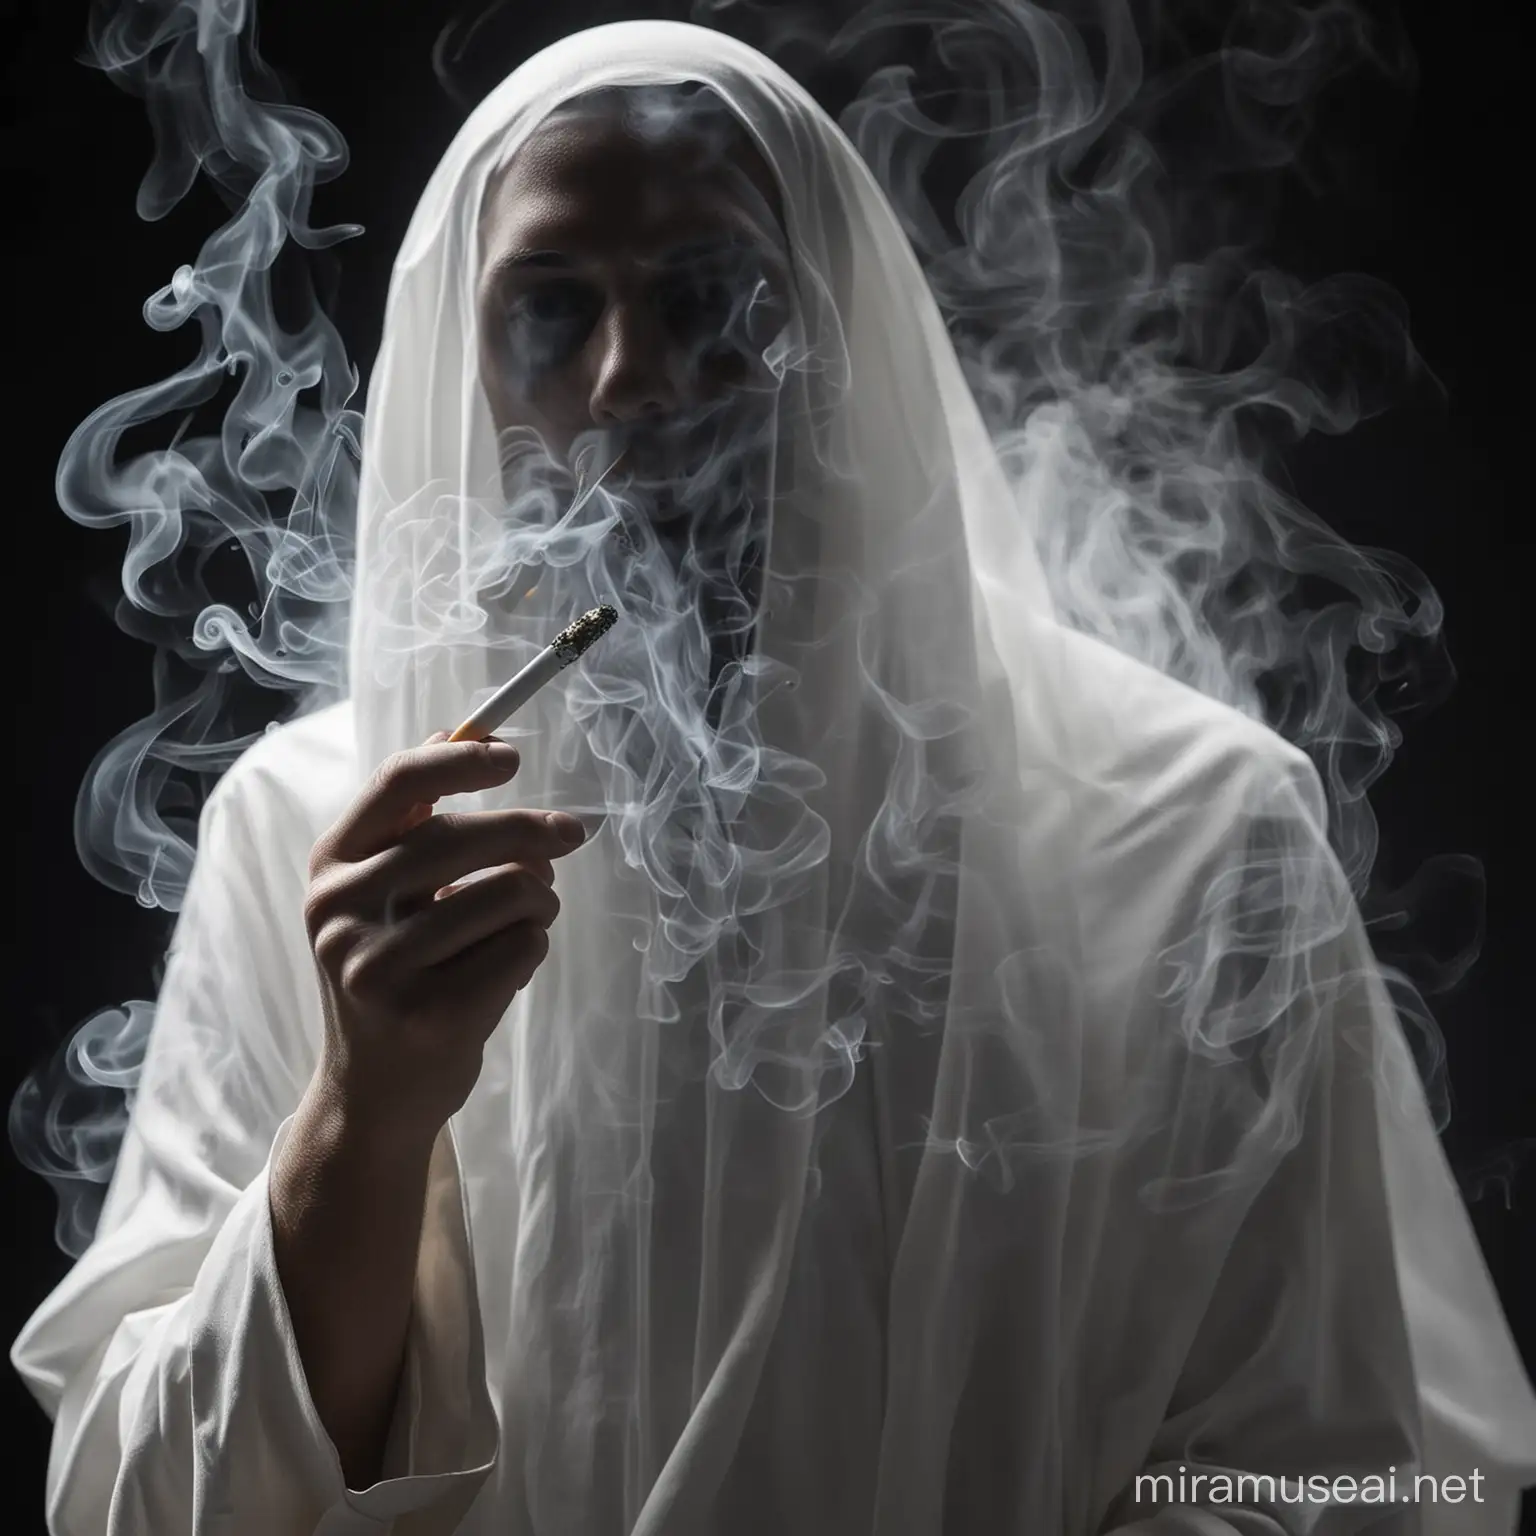 Ethereal Ghostly Silhouette Smoke from a Lit Cigarette